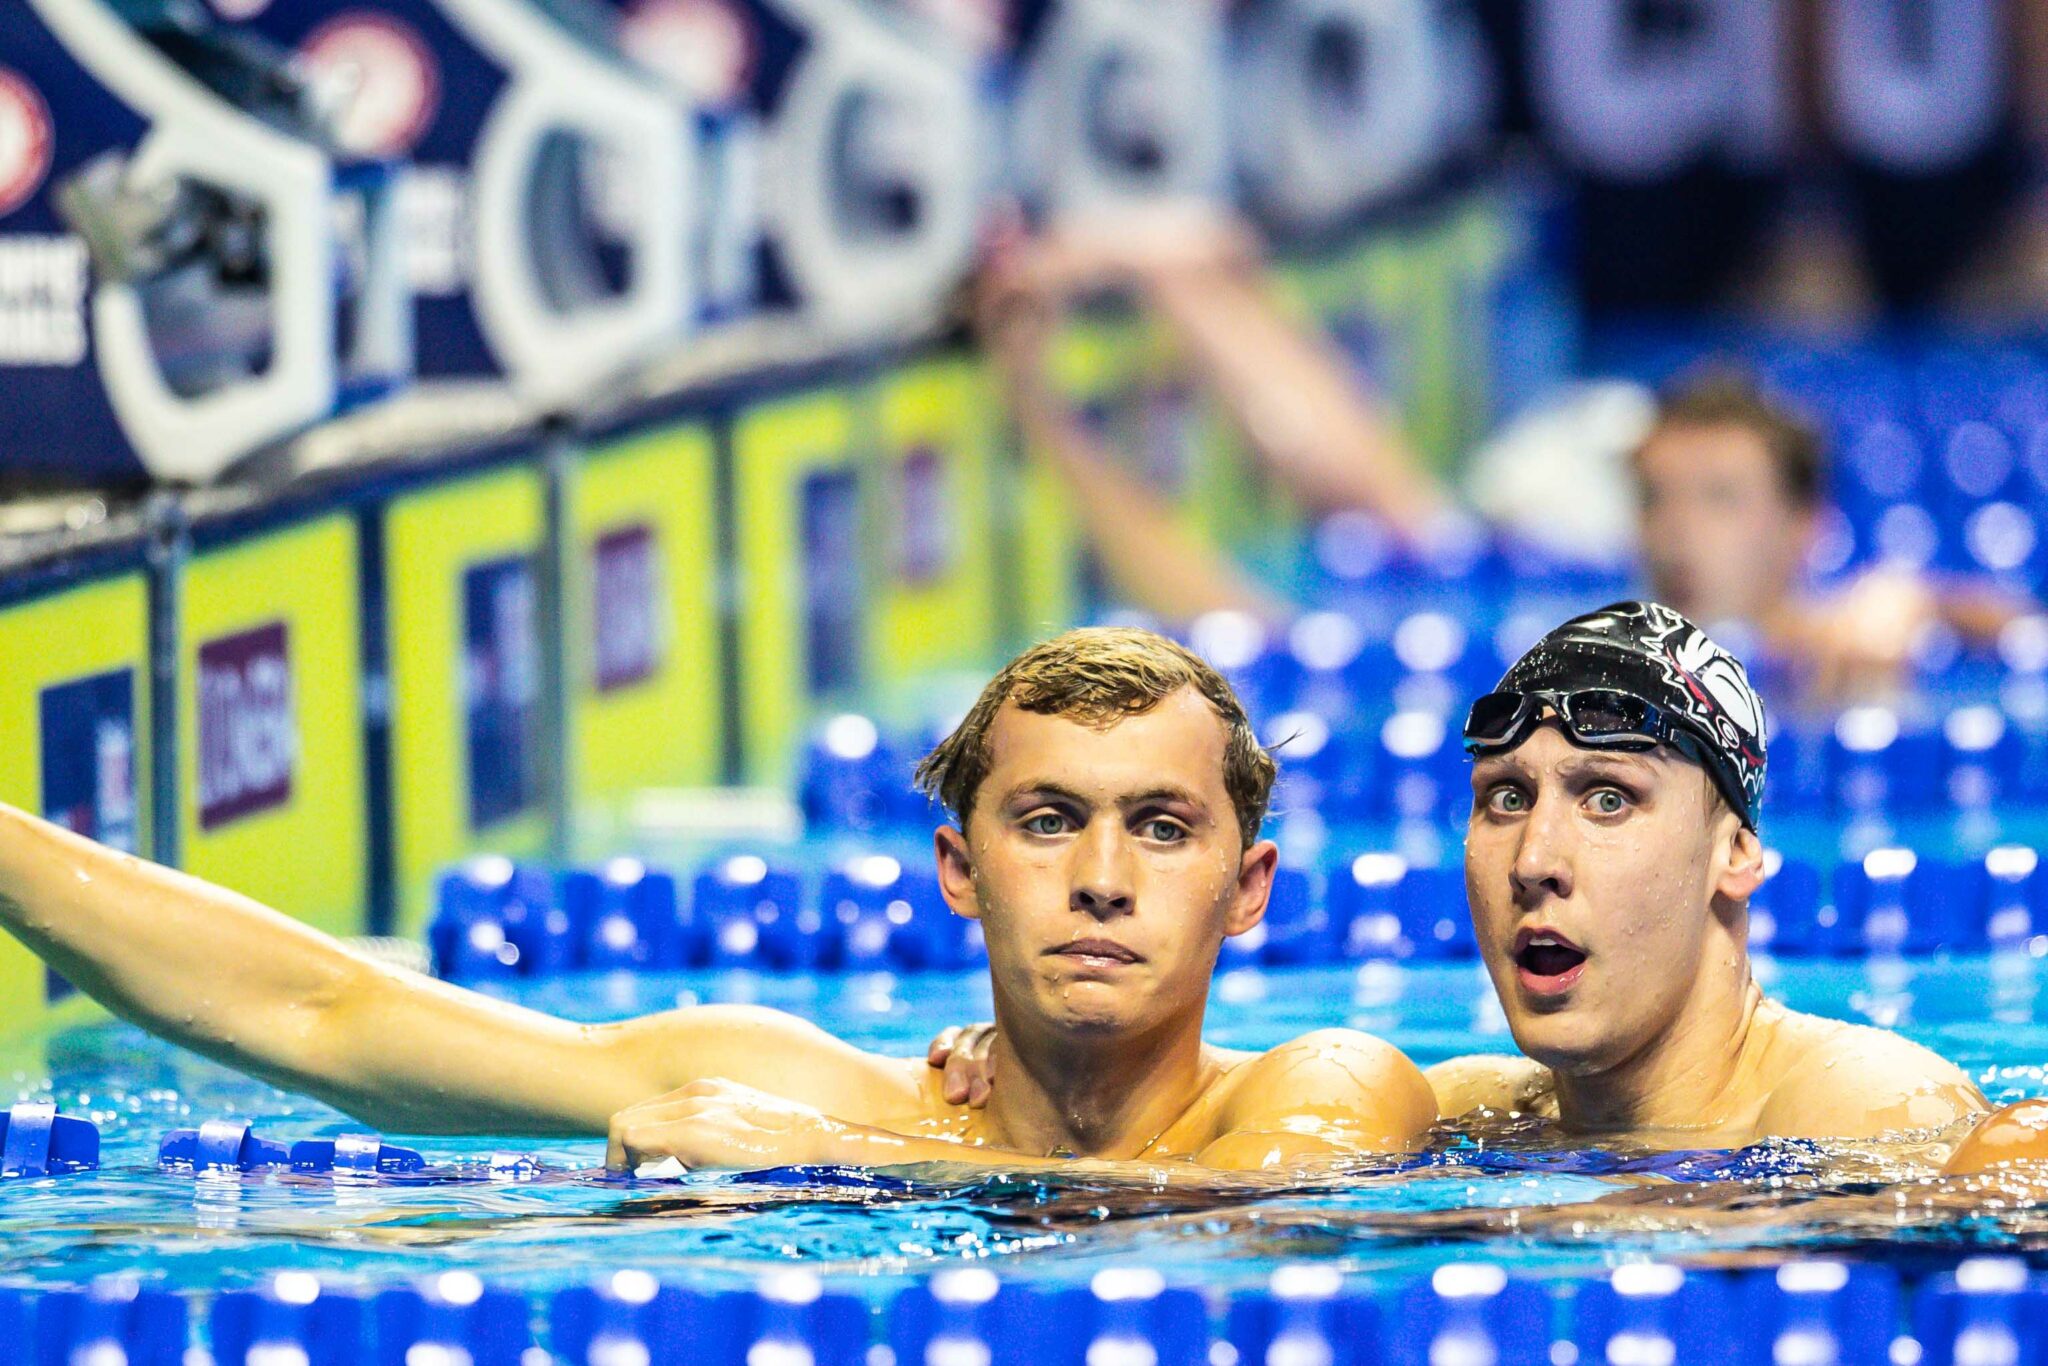 2022 Us Trials Previews Carson Foster And The Quest For 400 Im Gold Laptrinhx News